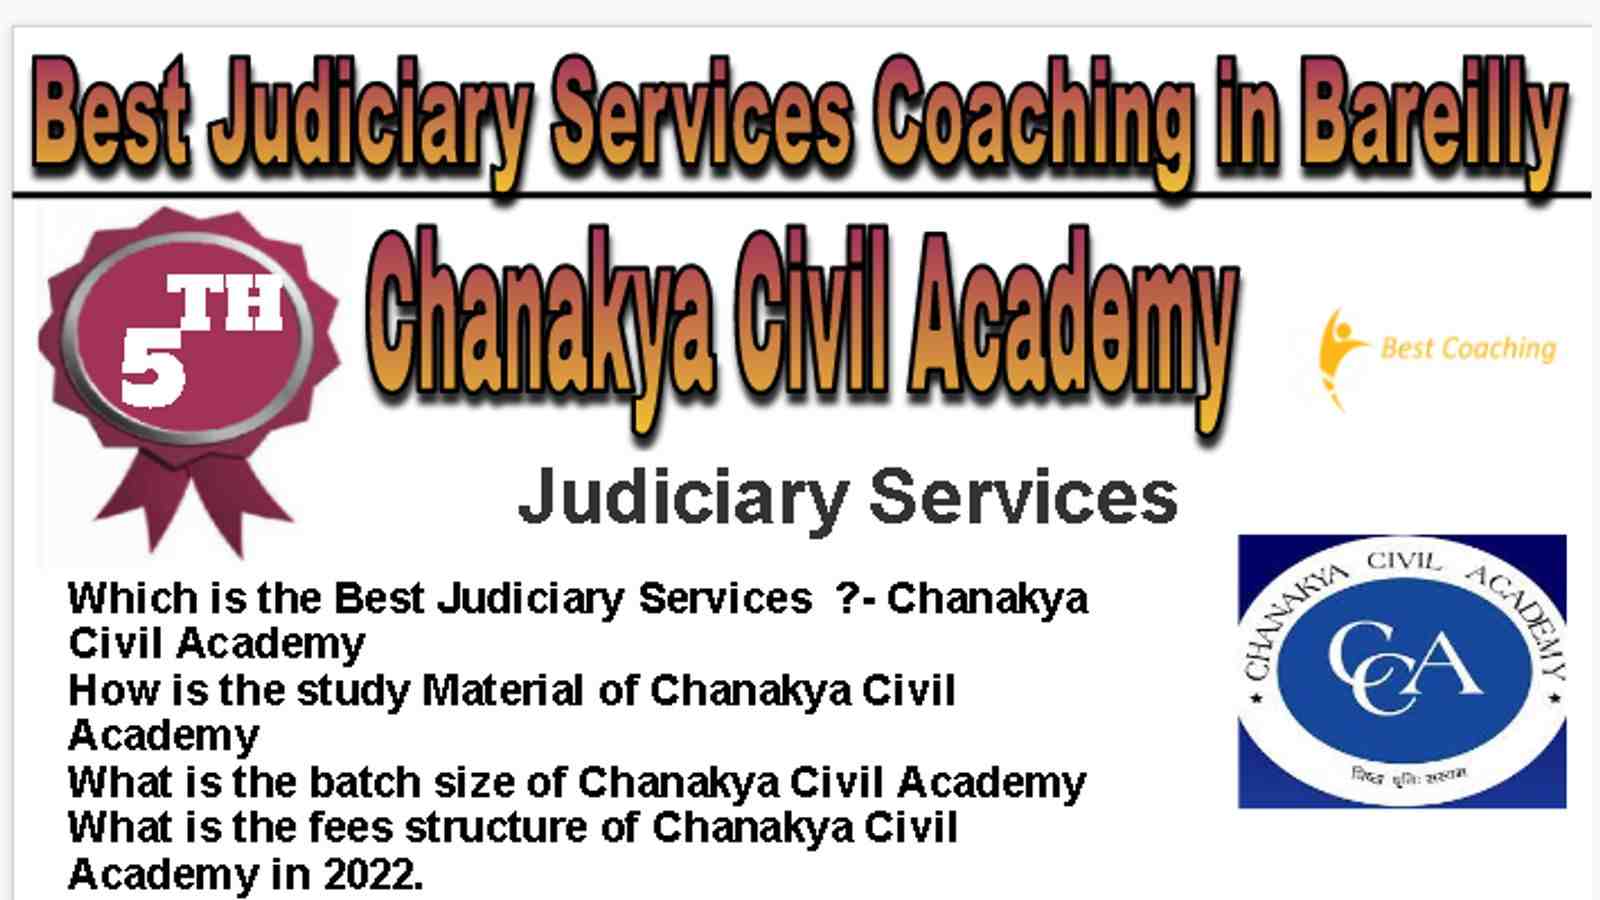 Rank 5 Best Judiciary Services Coaching in Bareilly